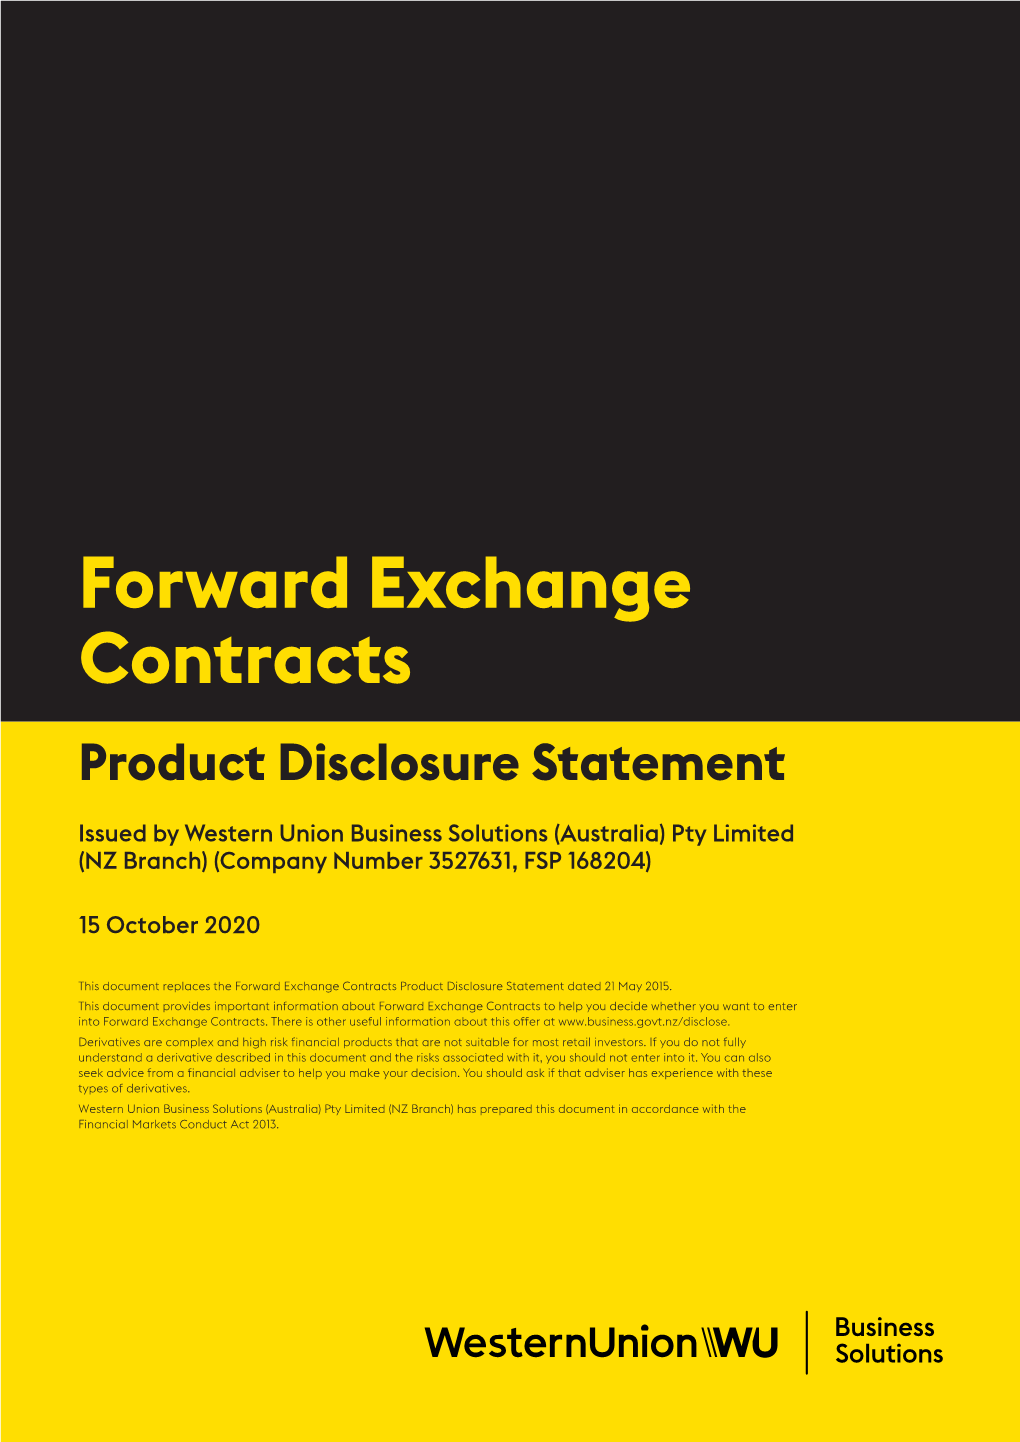 Forward Exchange Contracts